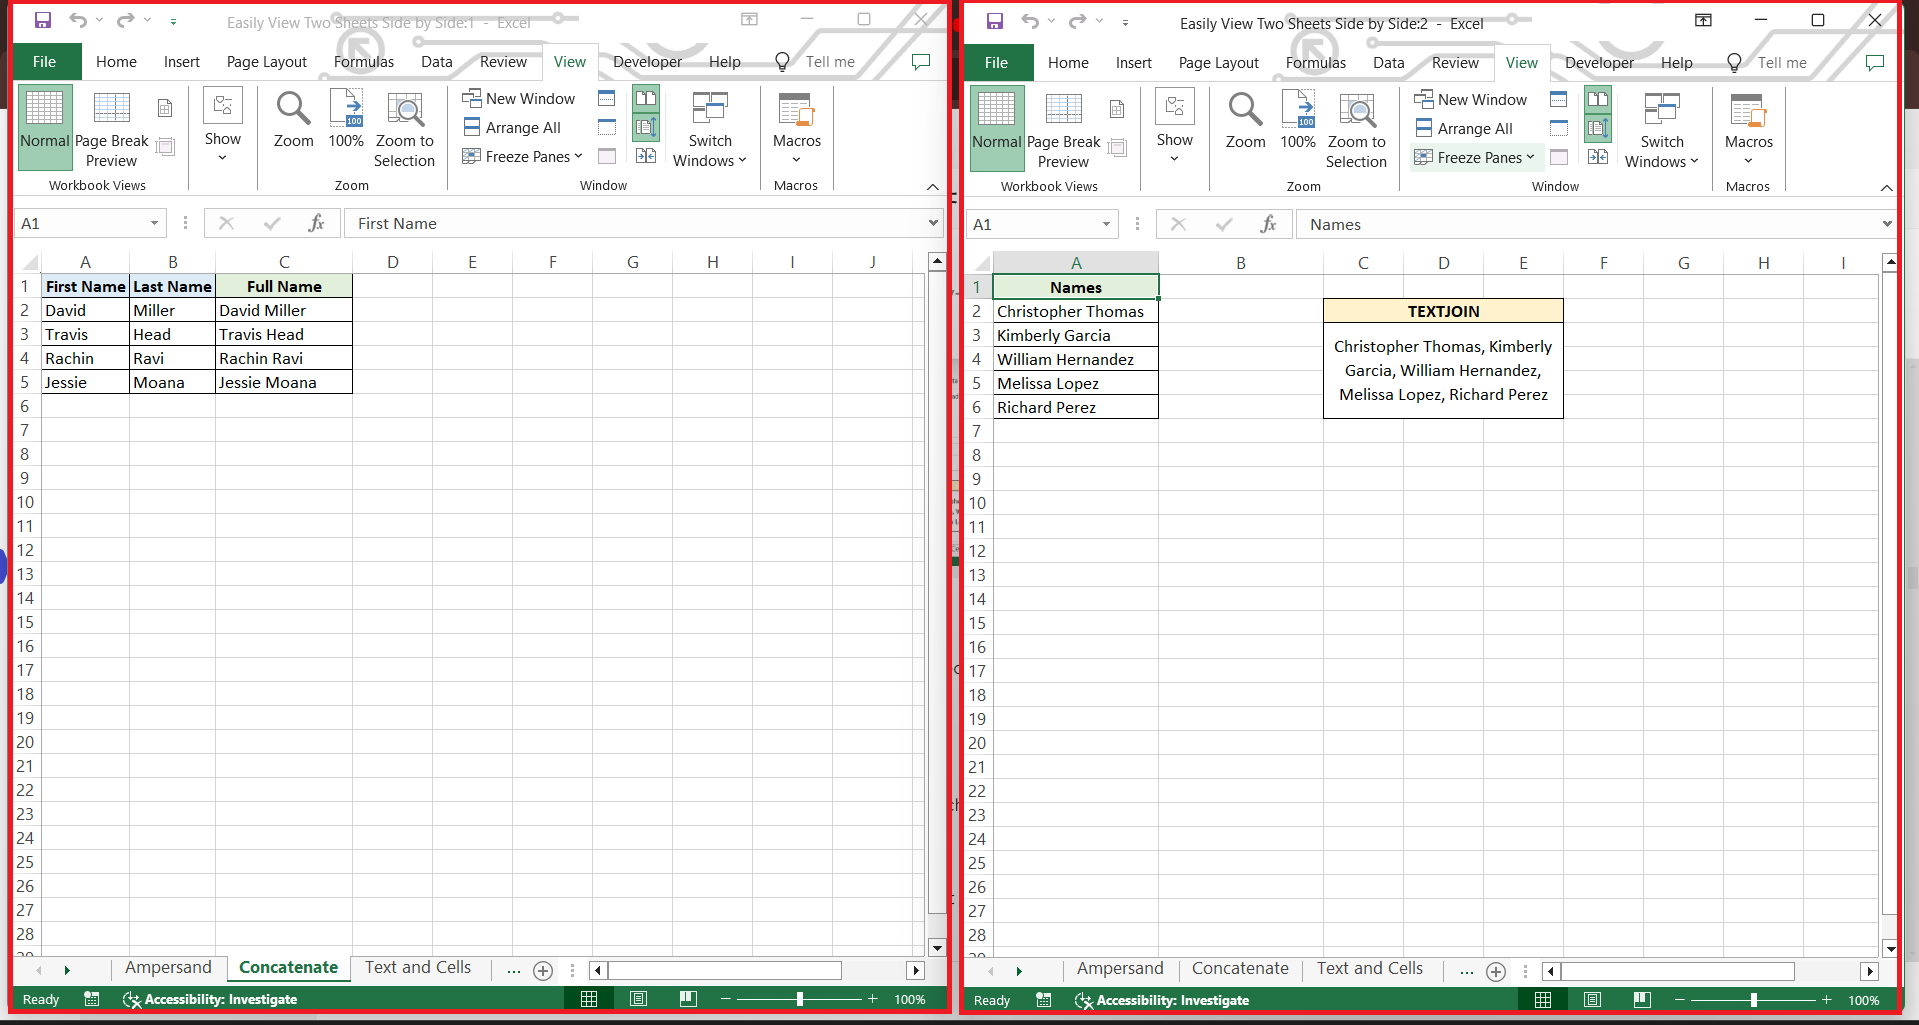 How to View Sheets Side by Side in Excel Fast | MyExcelOnline